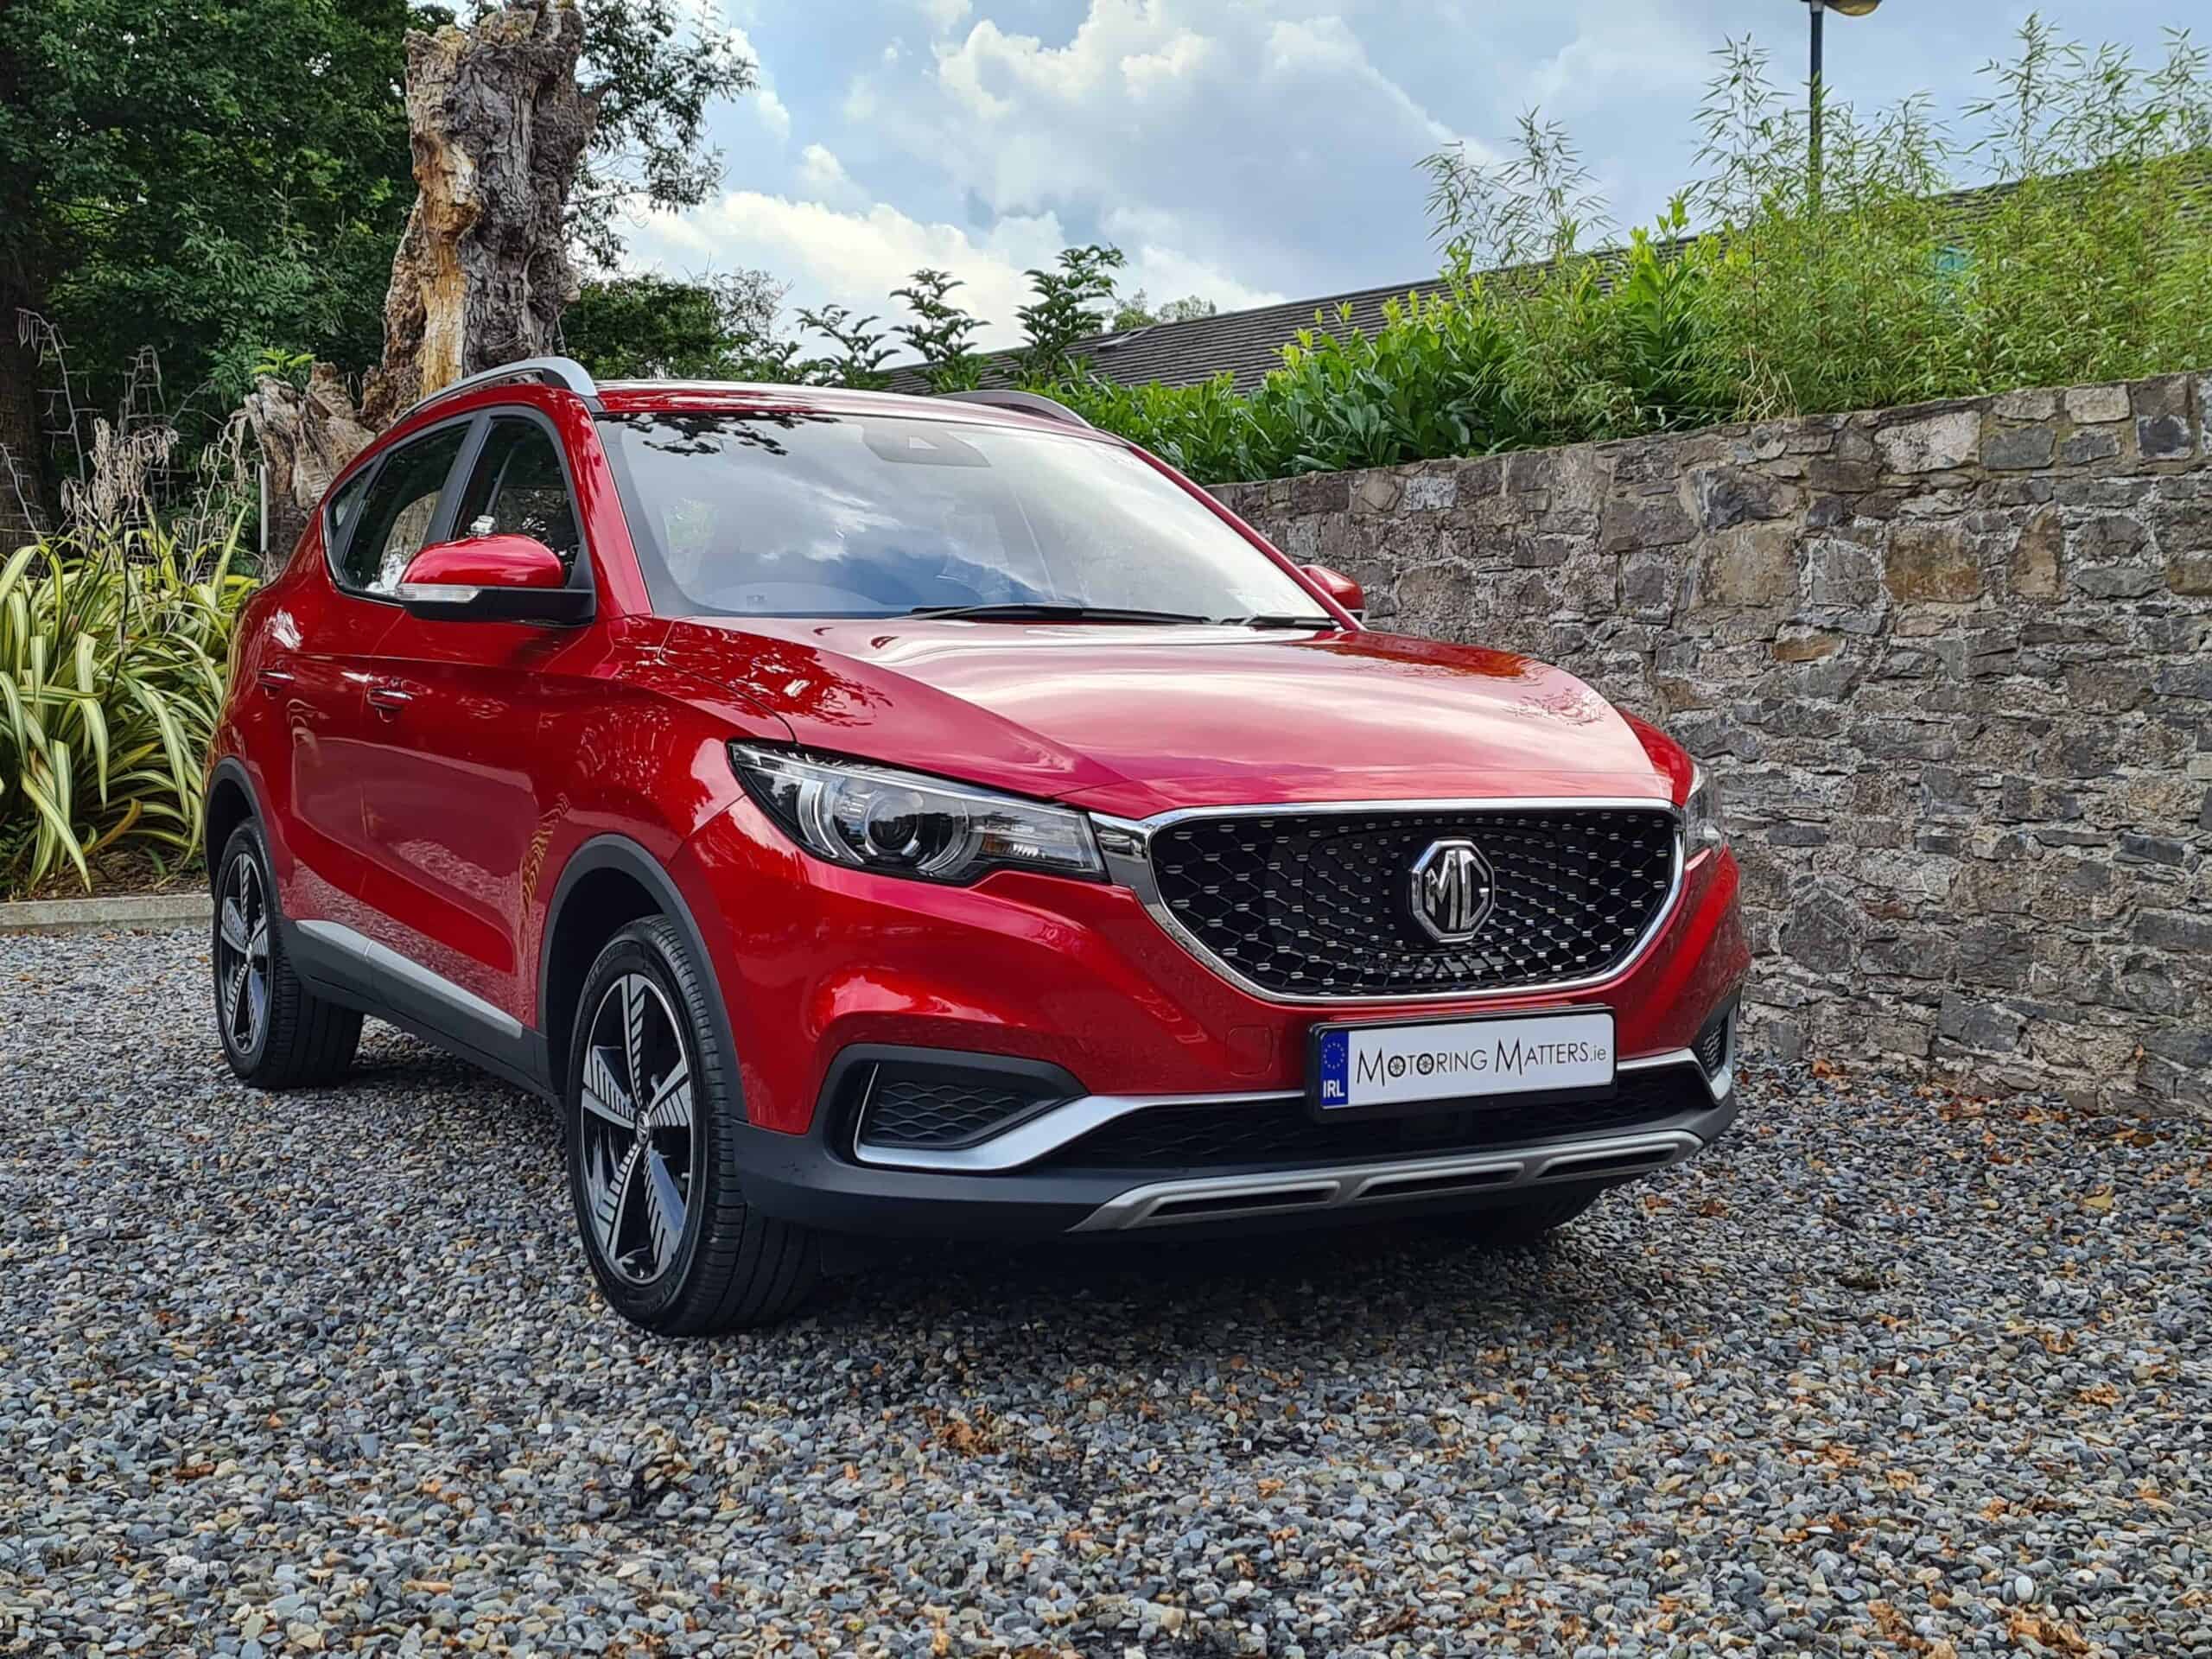 New MG ZS EV (FullyElectric SUV) Built for a New Generation